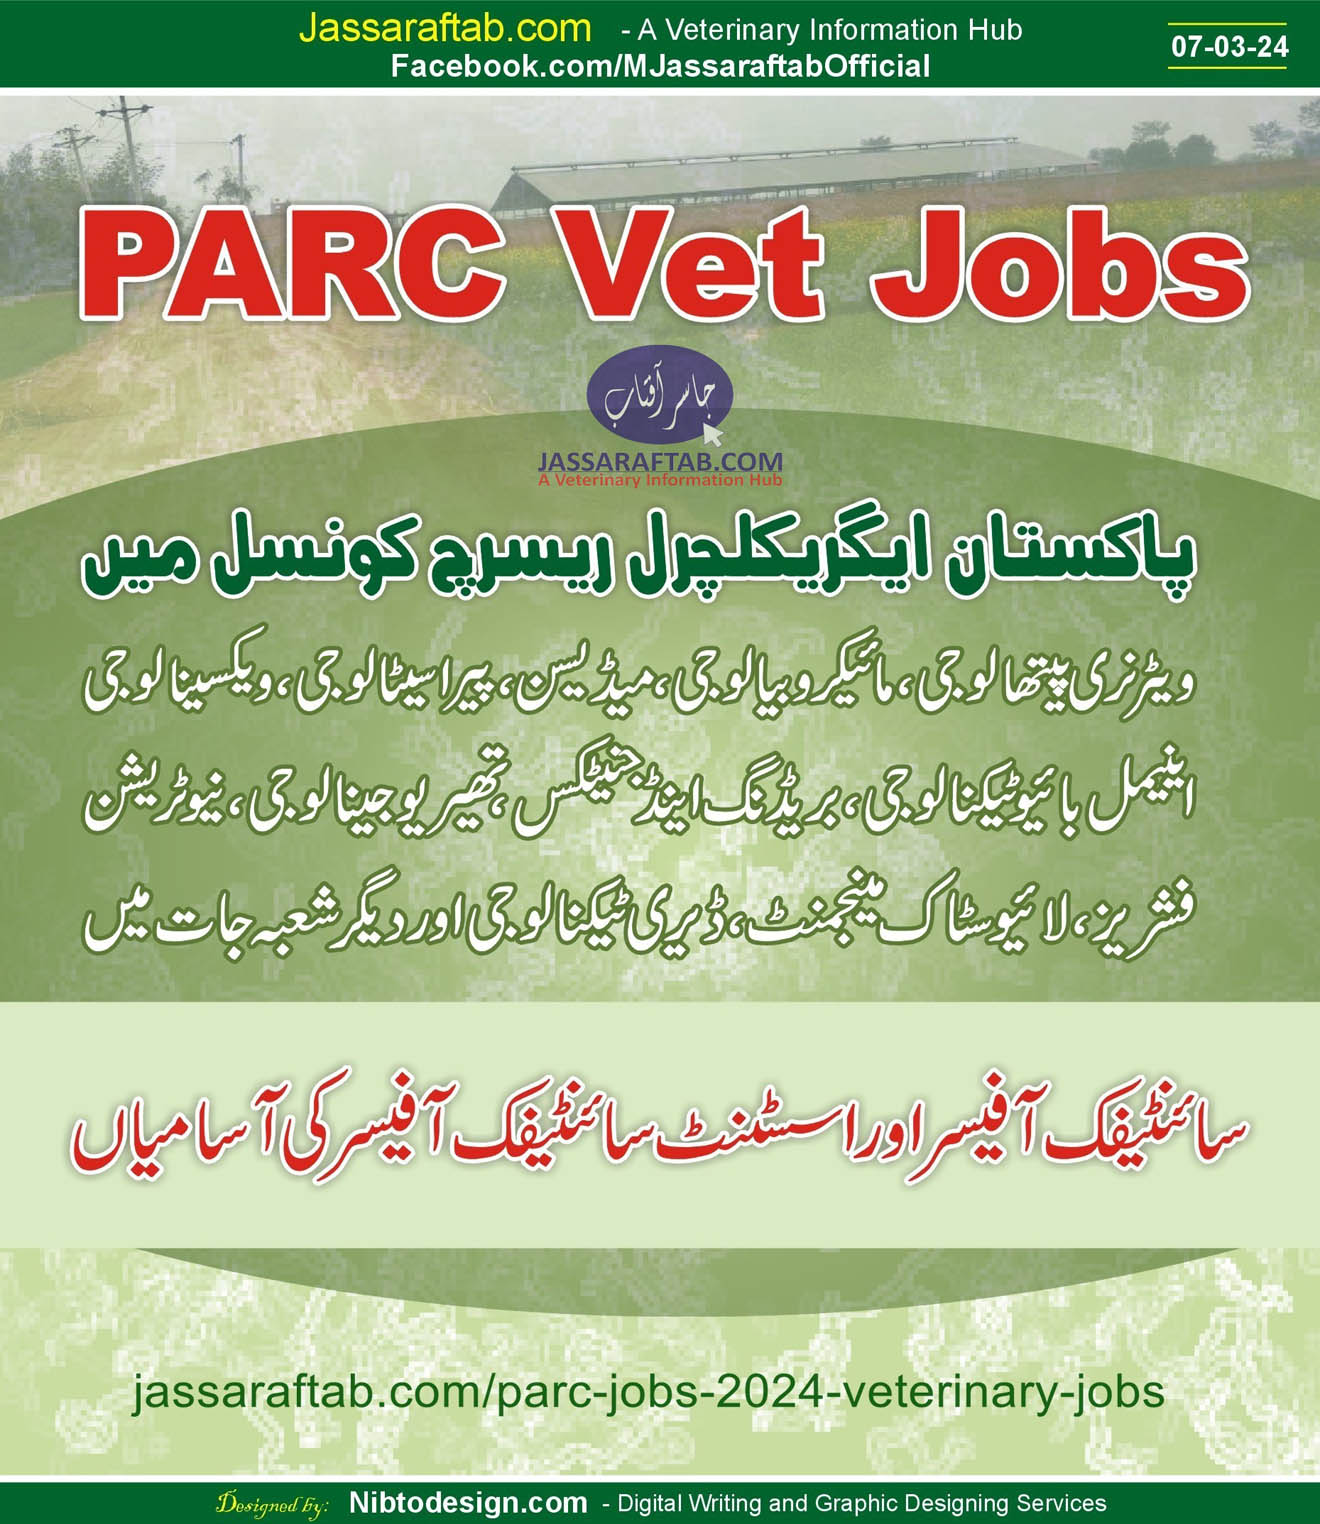 Veterinary Jobs and PARC Jobs 2024 for Vets